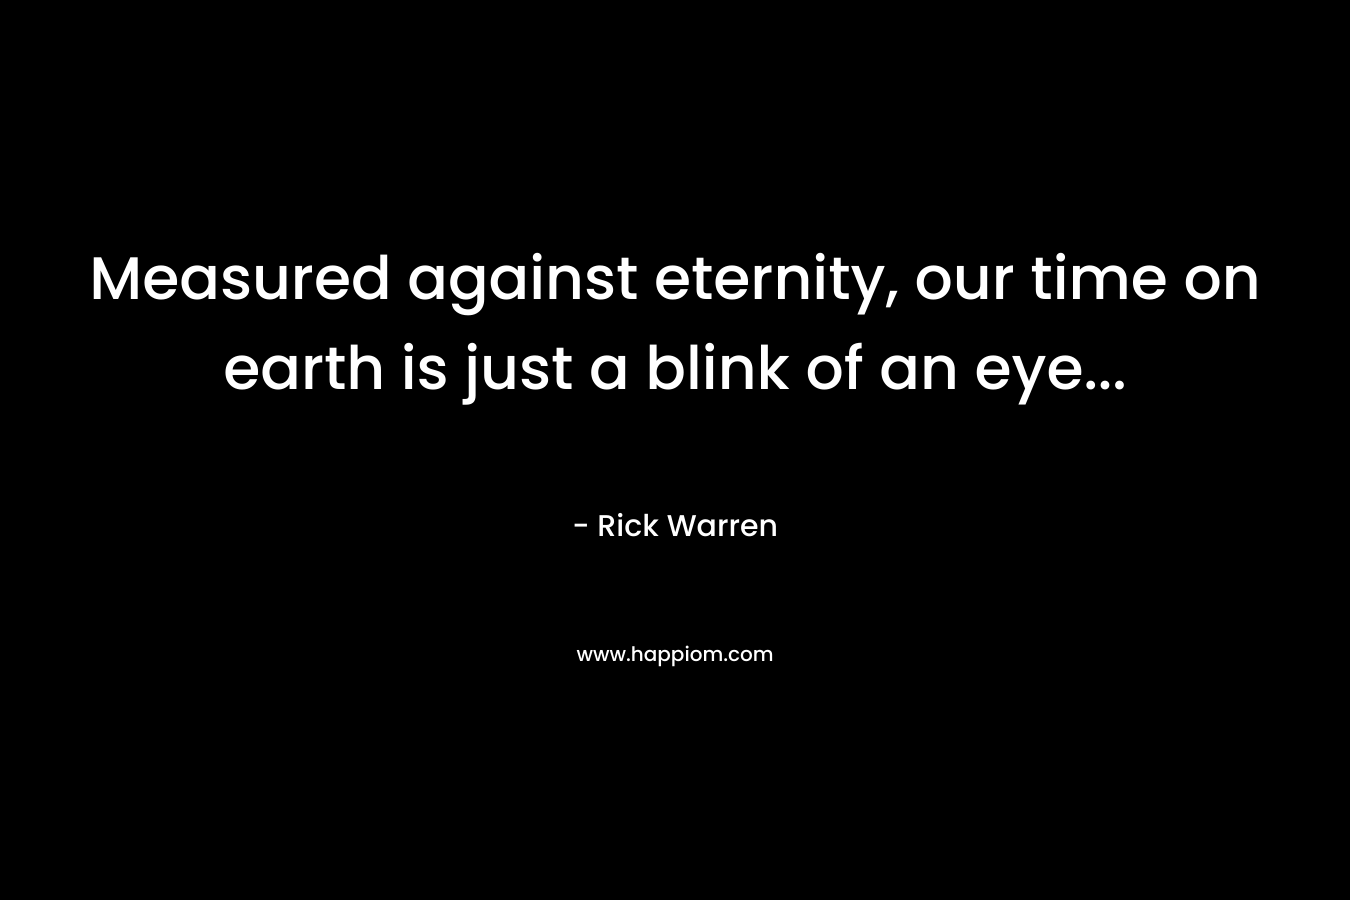 Measured against eternity, our time on earth is just a blink of an eye...